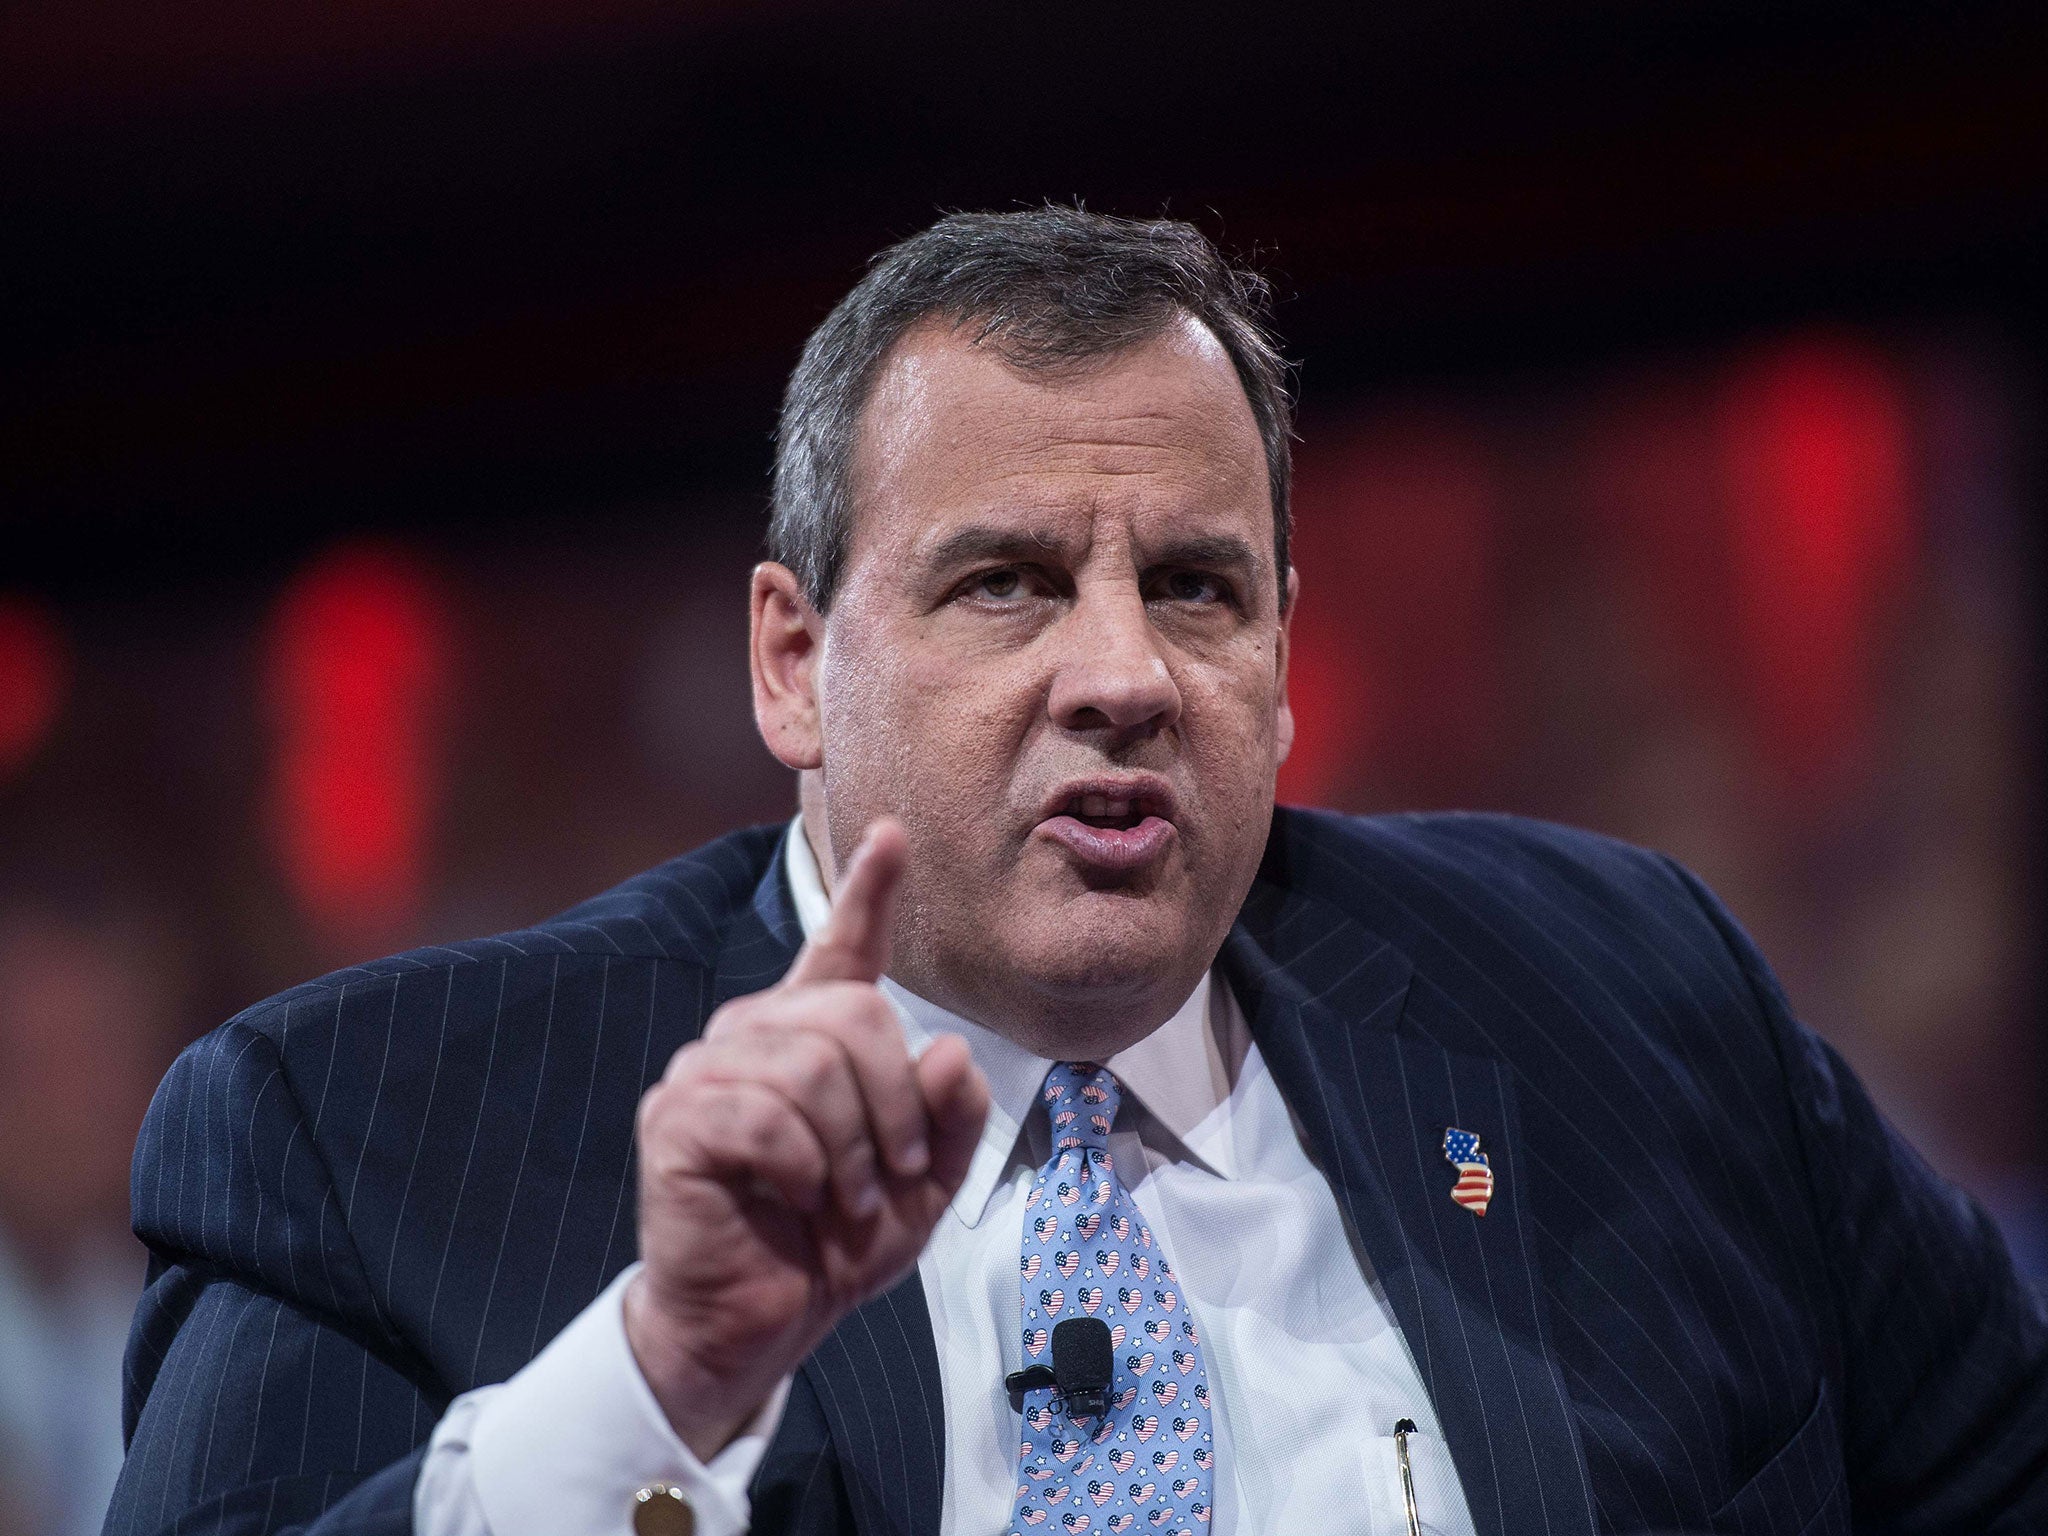 Chris Christie, a would-be Republican candidate for the White House, has called for visitors to the US to be tracked until they have left, as if they were courier packages